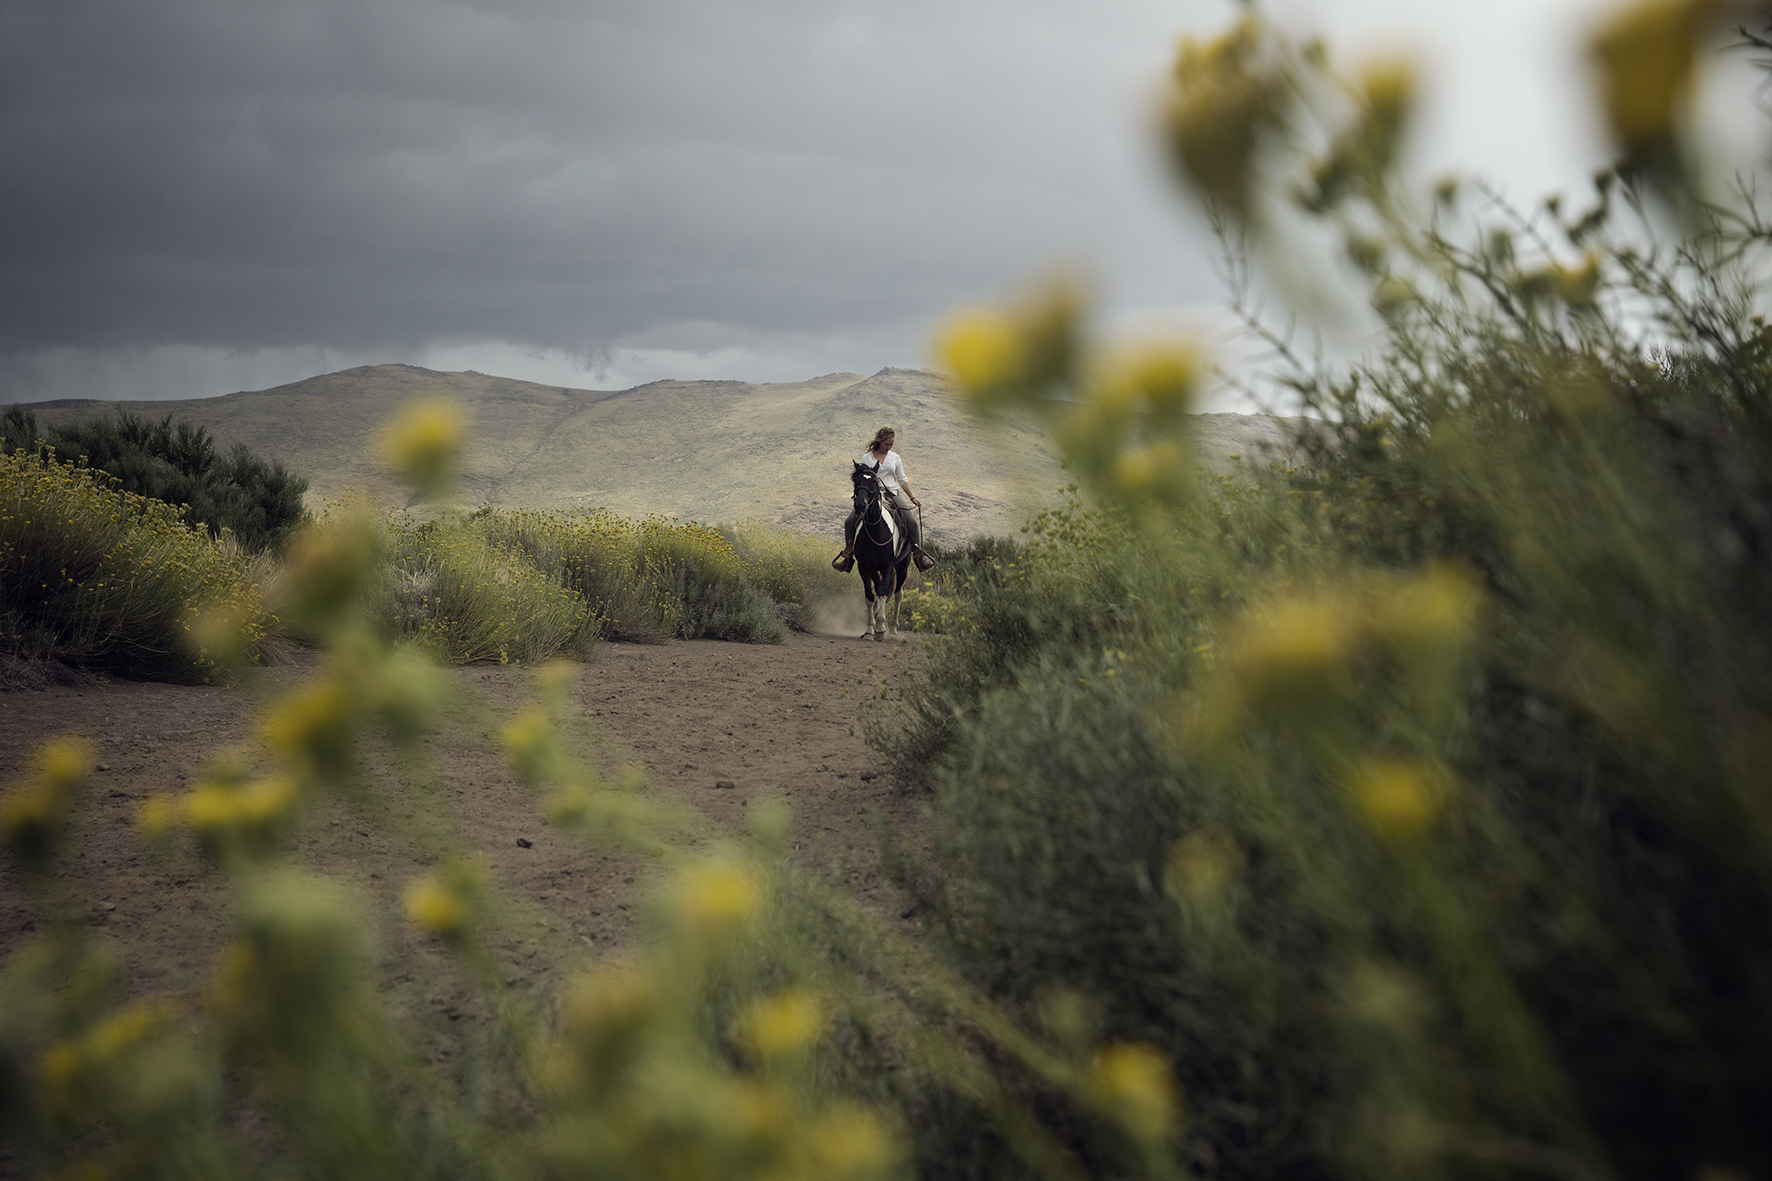 Woman riding horse in Argentina landscape action photography